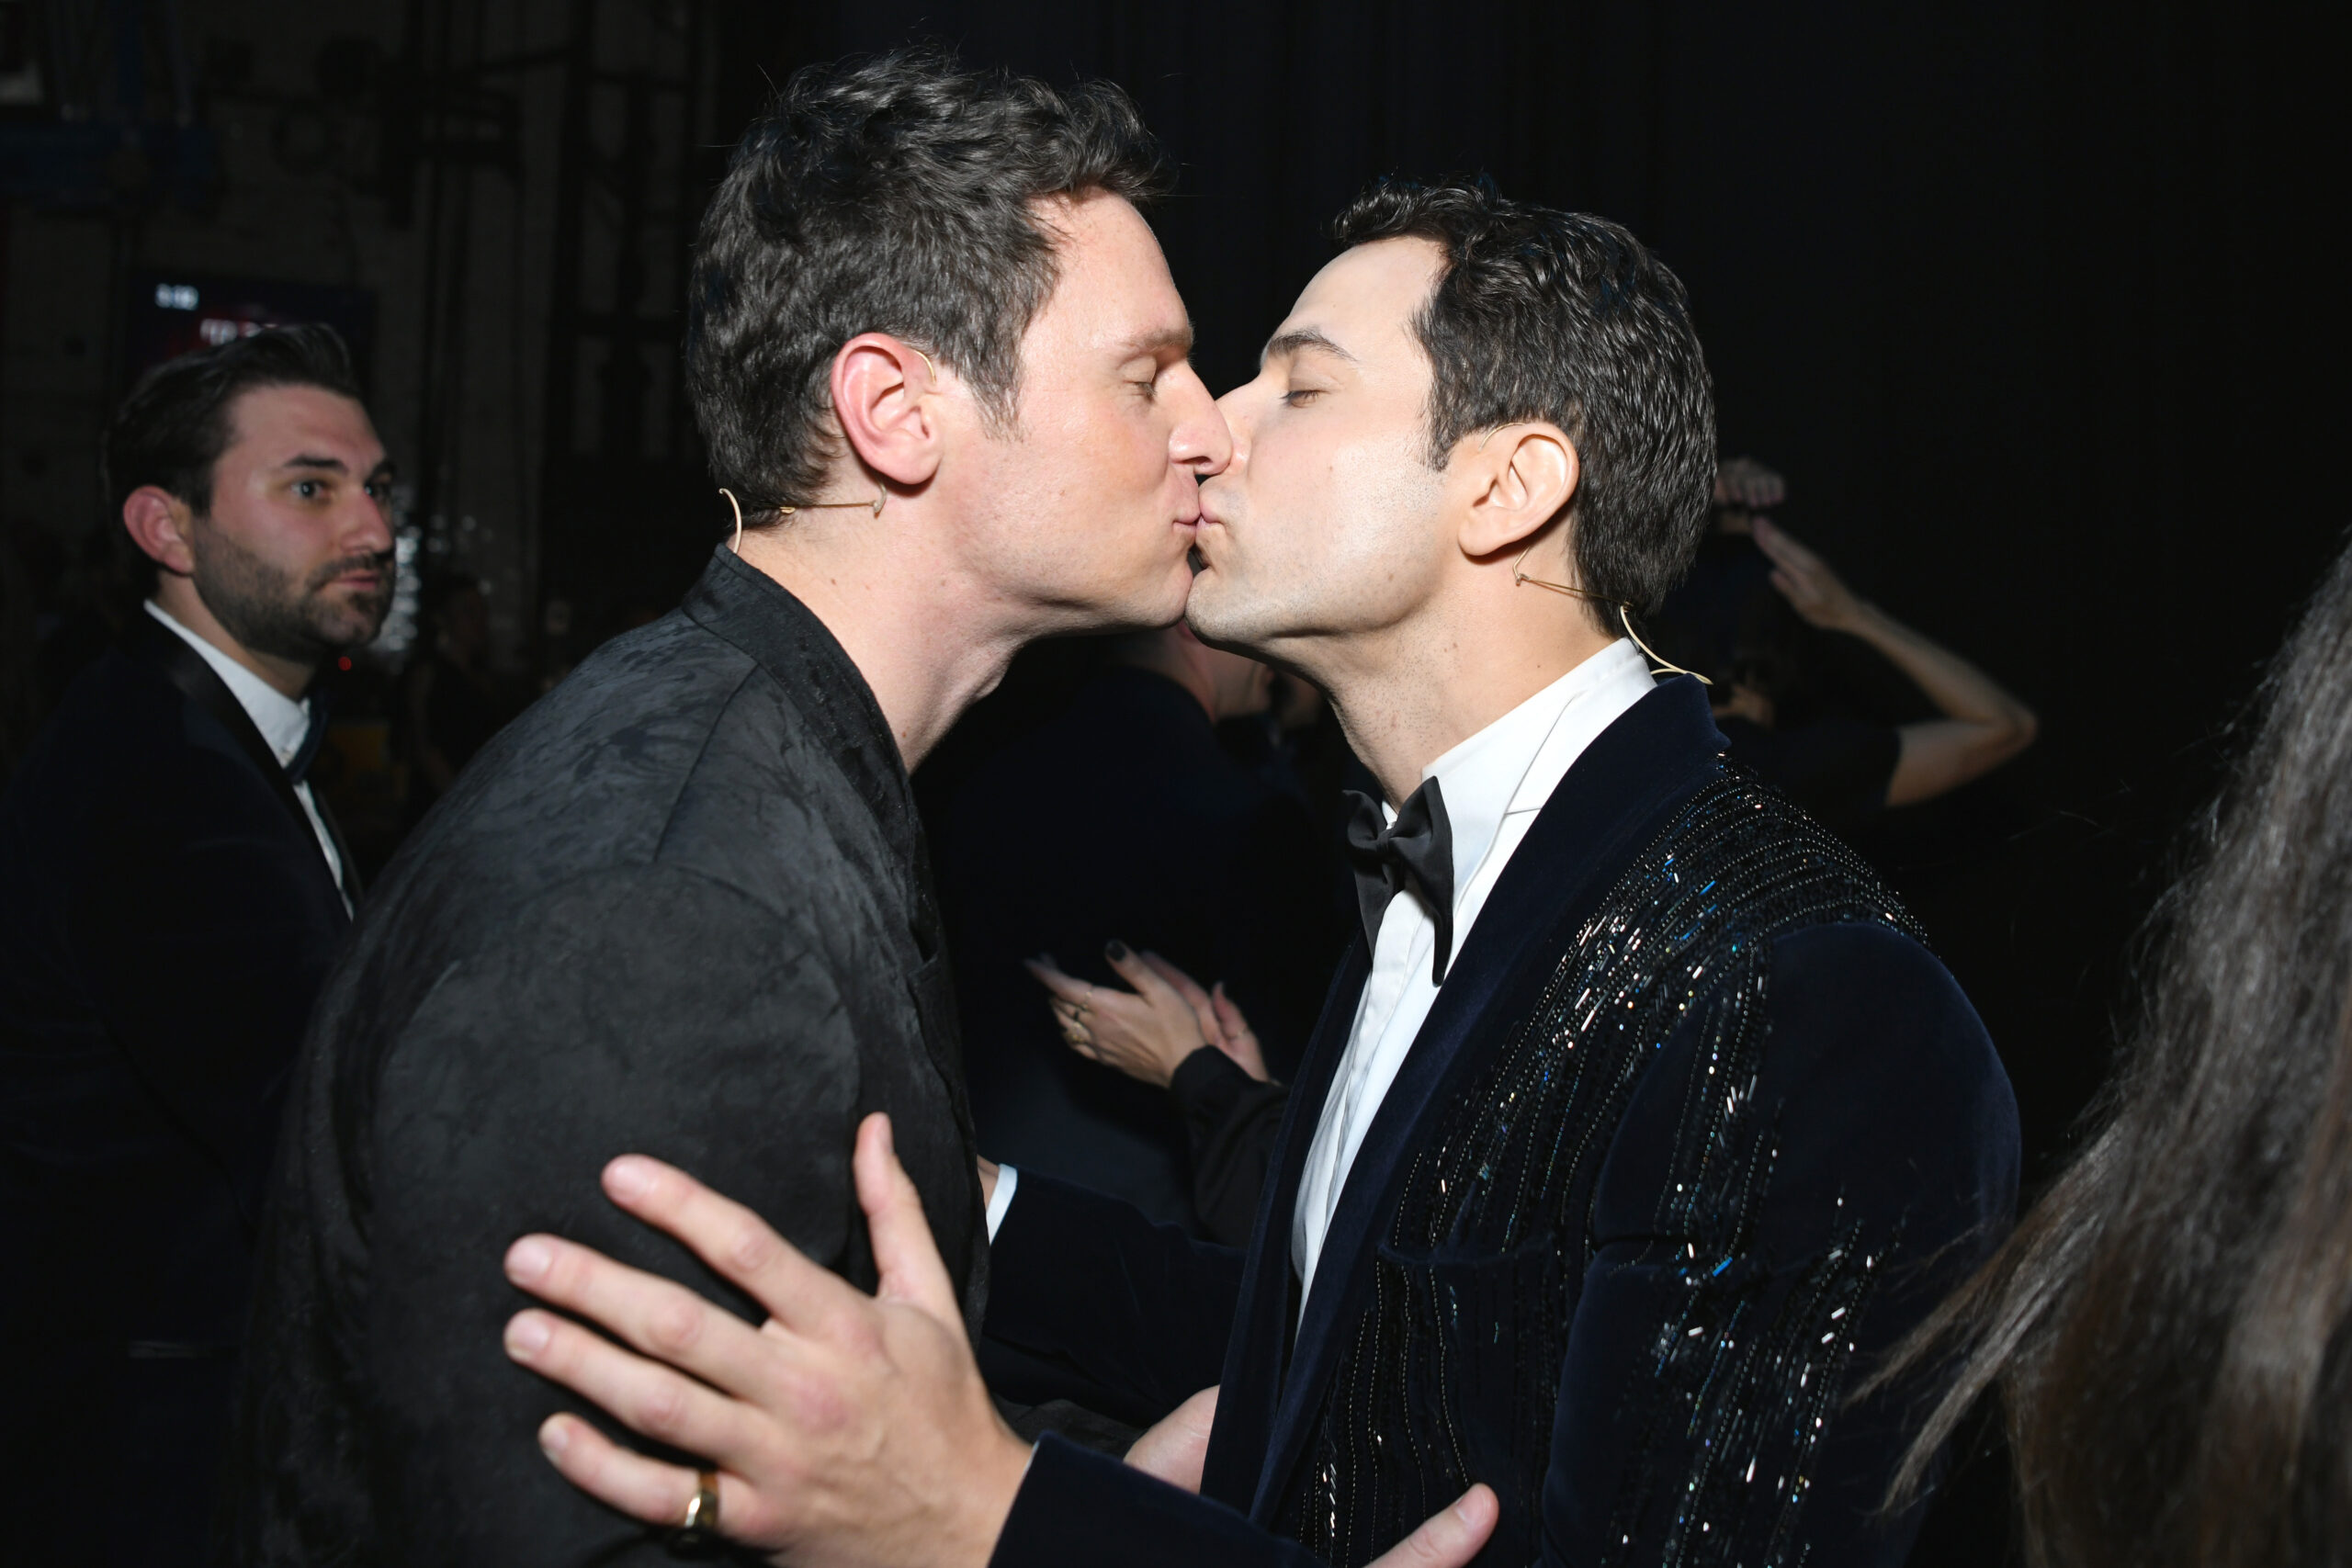 Jonathan Groff and Skylar Astin at the 75th Annual Tony Awards. Photo by Jenny Anderson/Getty Images for Tony Awards Productions.